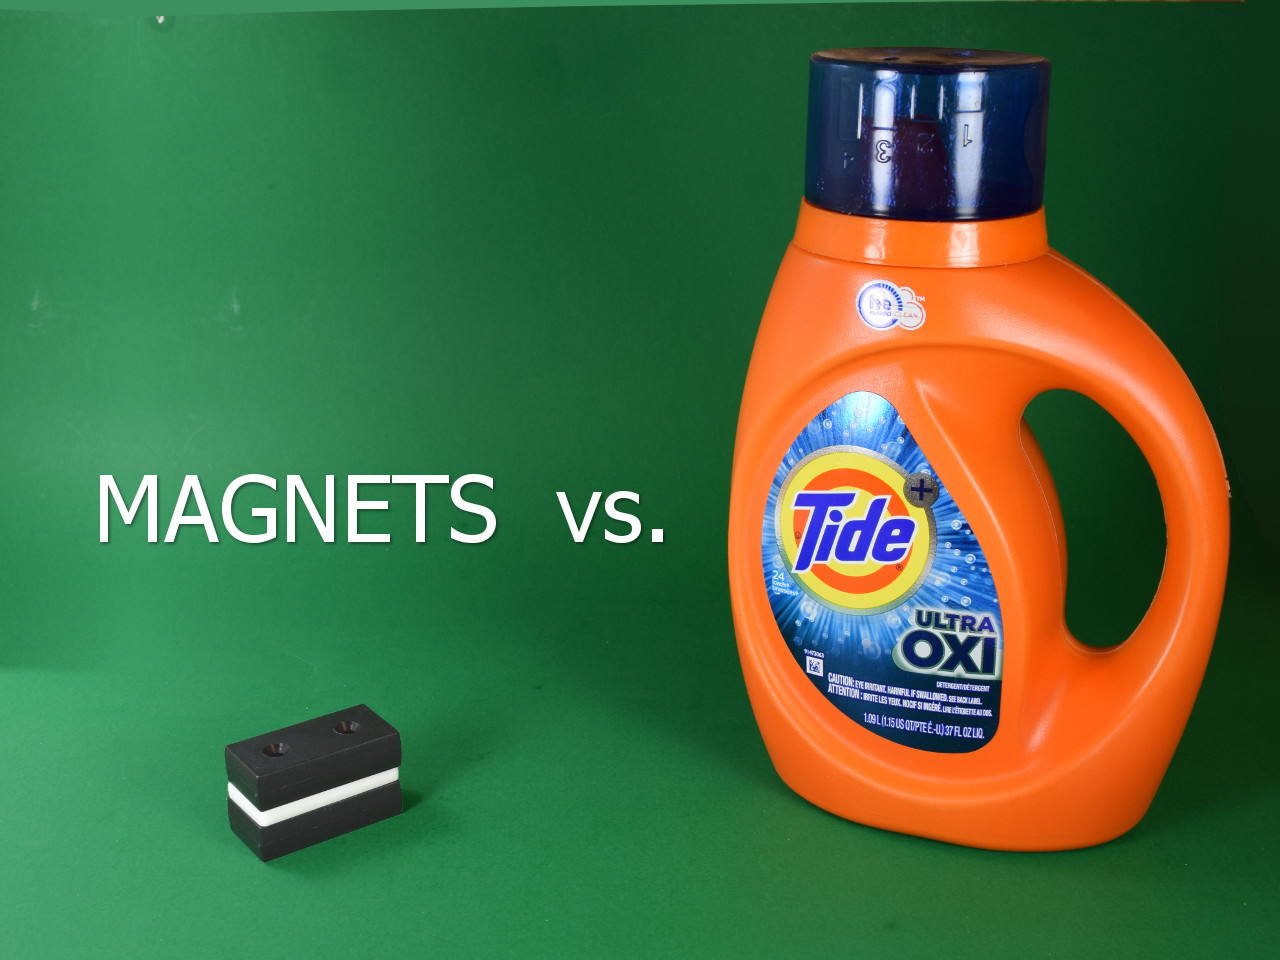 Comparing magnets vs laundry detergent